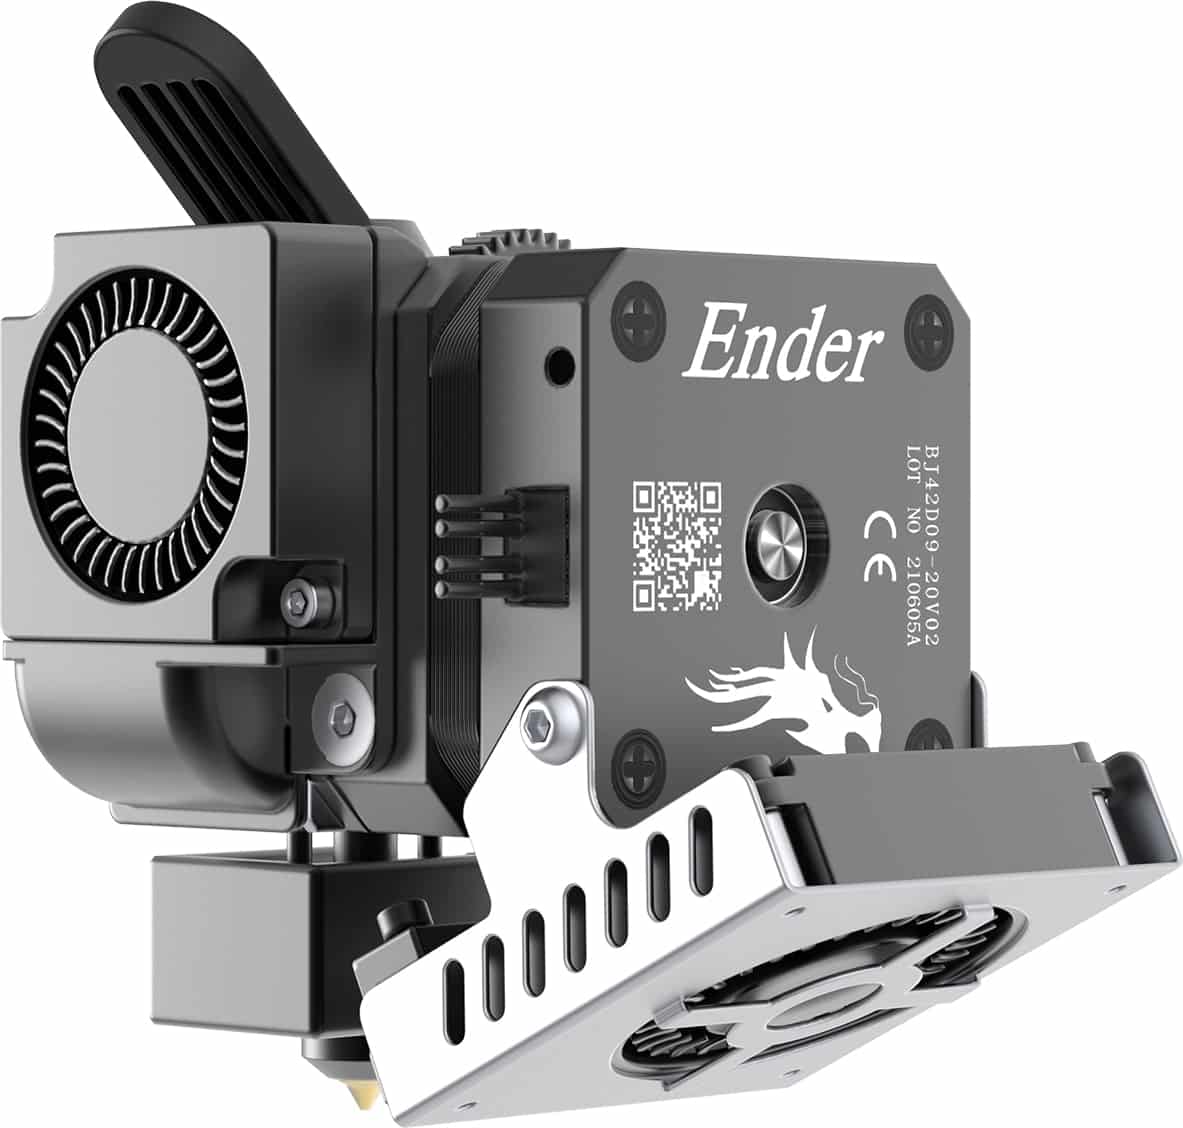 Creality Ender 3 S1 Sprite Dual Gear Direct Drive Extruder | CyberCrew